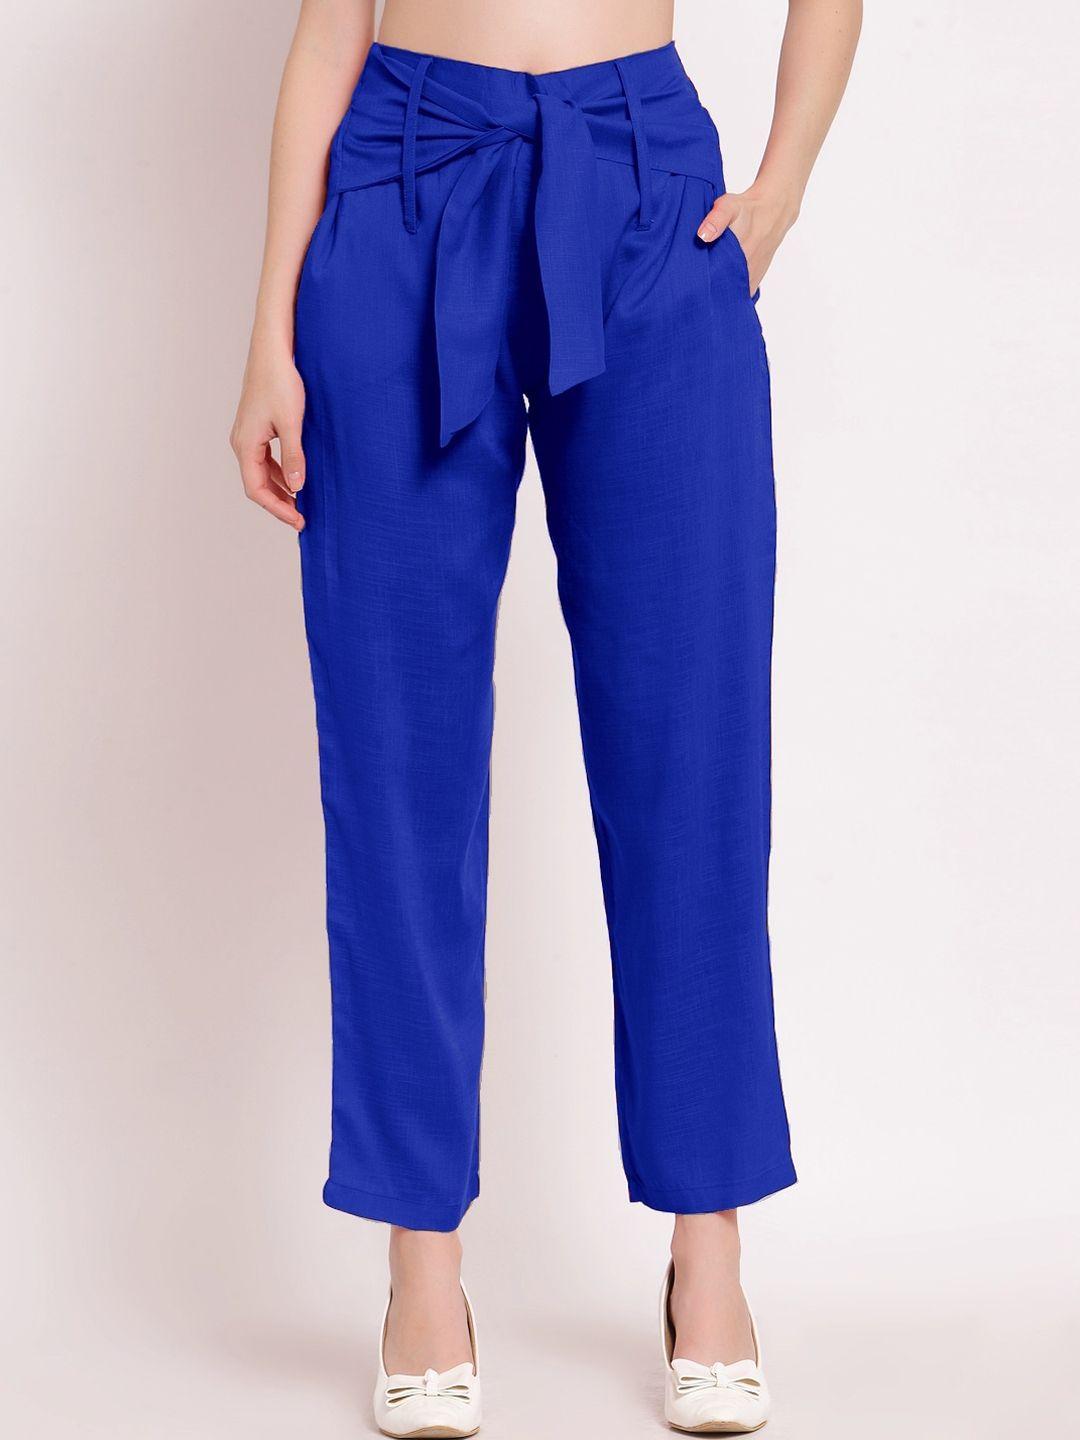 patrorna-women-smart-straight-fit-pleated-cotton-culotte-trousers